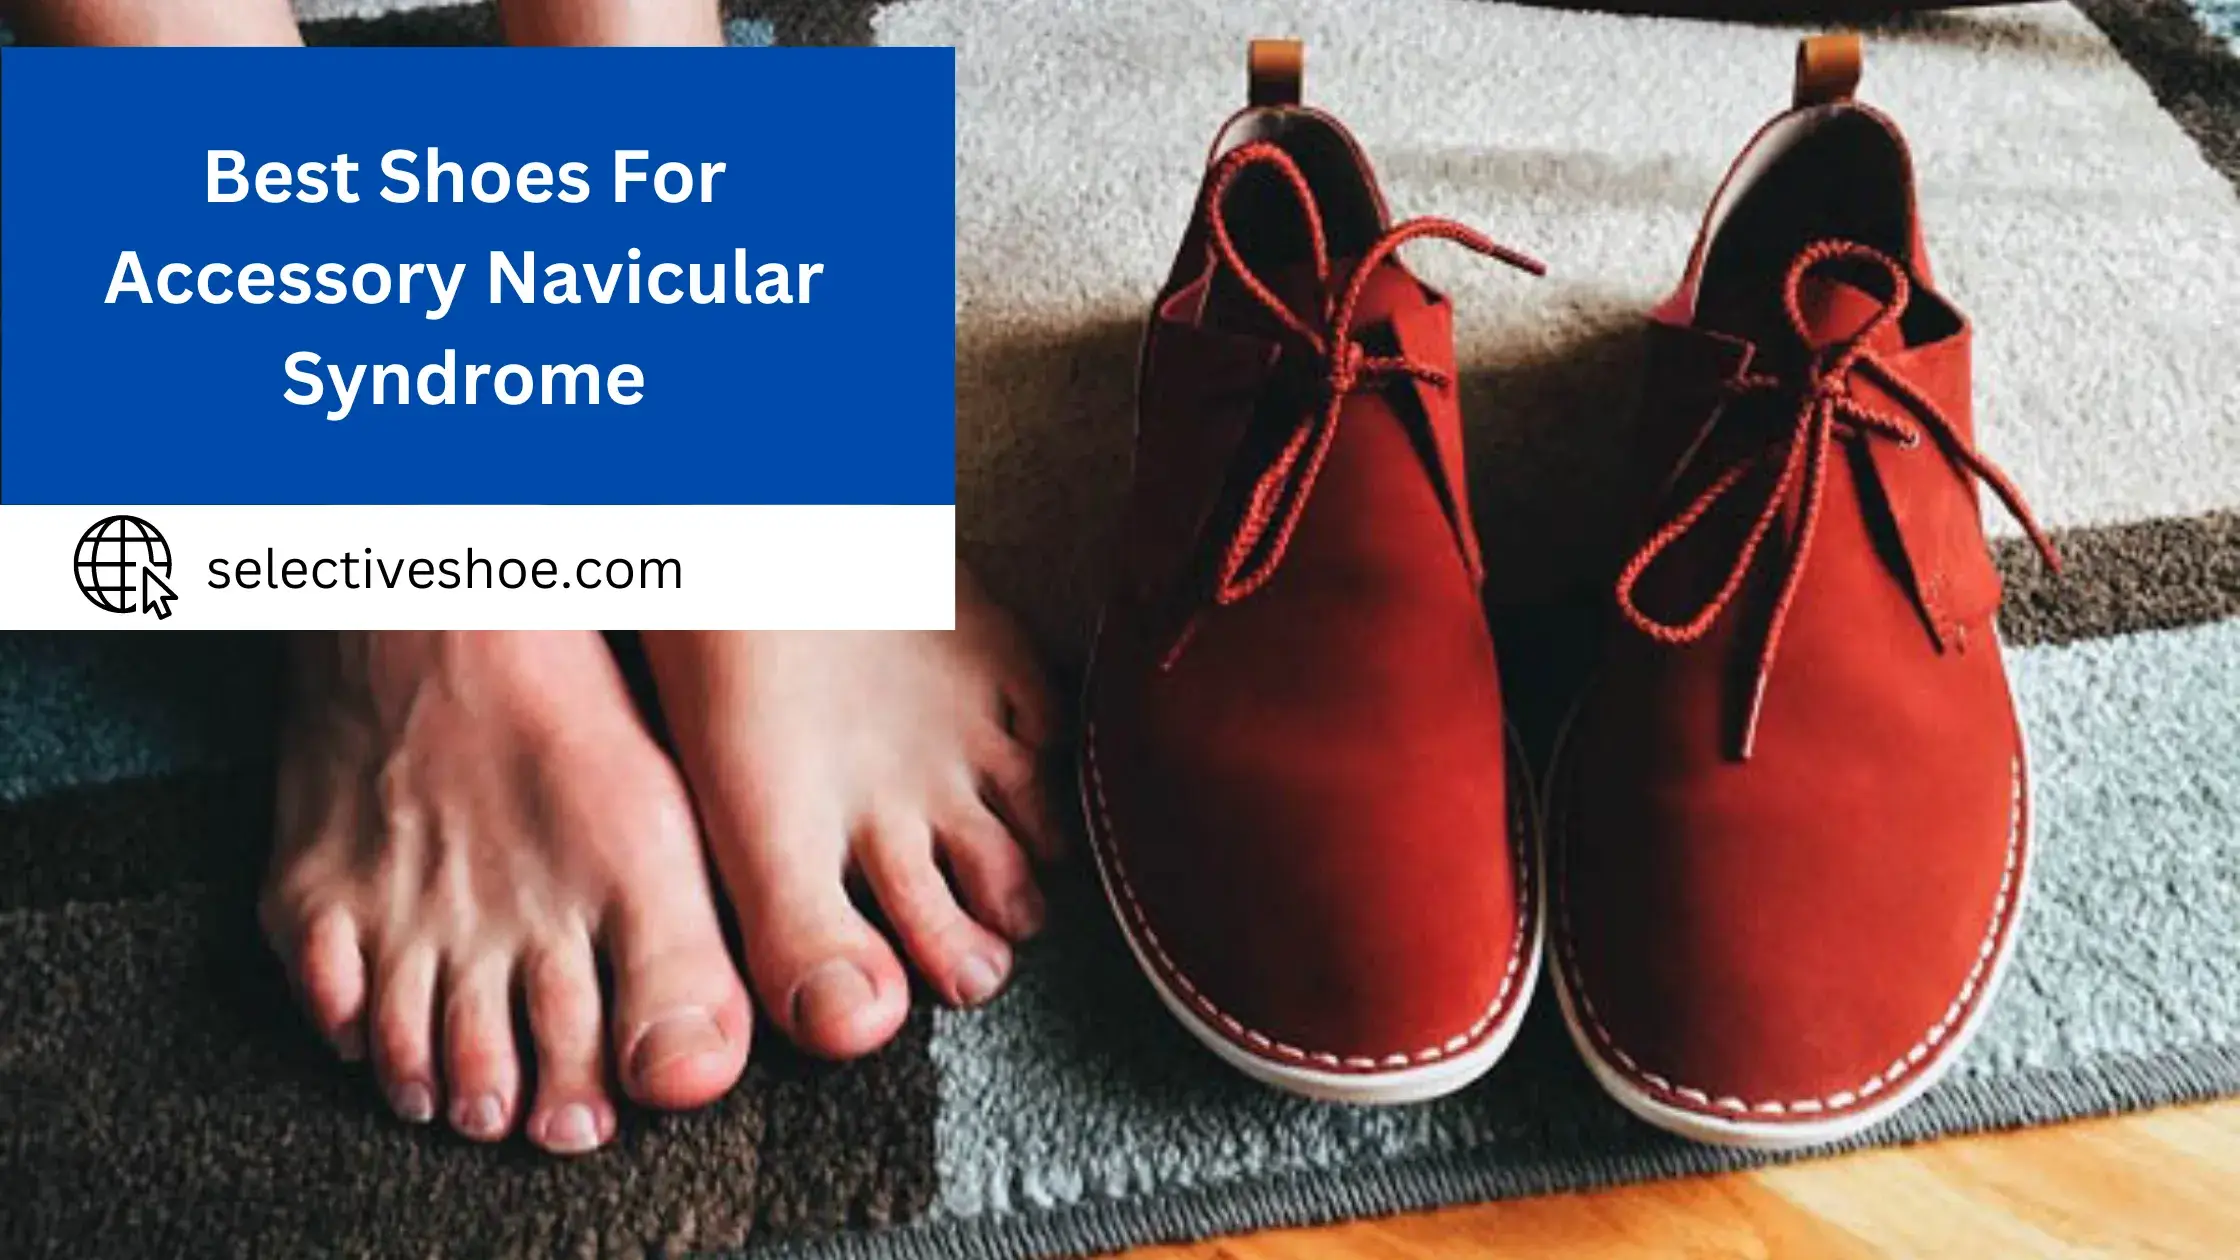 Best Shoes For Accessory Navicular Syndrome - Expert Choice